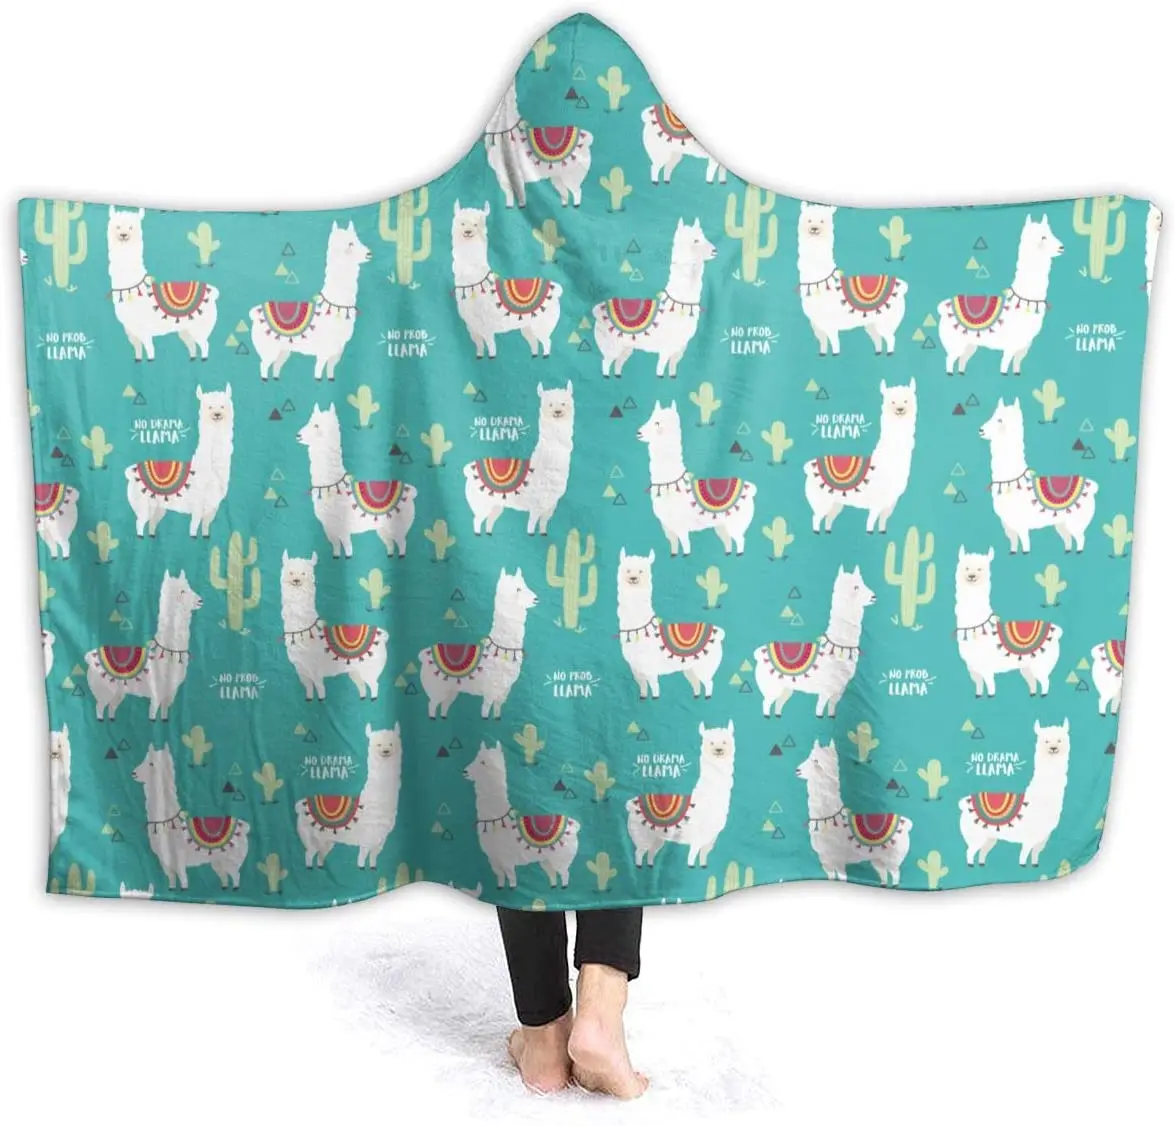 

Alpaca No Prob-Llama and Cactus Hoodie Blanket Wearable Throw Blankets for Couch Blanket Hooded for Baby Kids Men Women